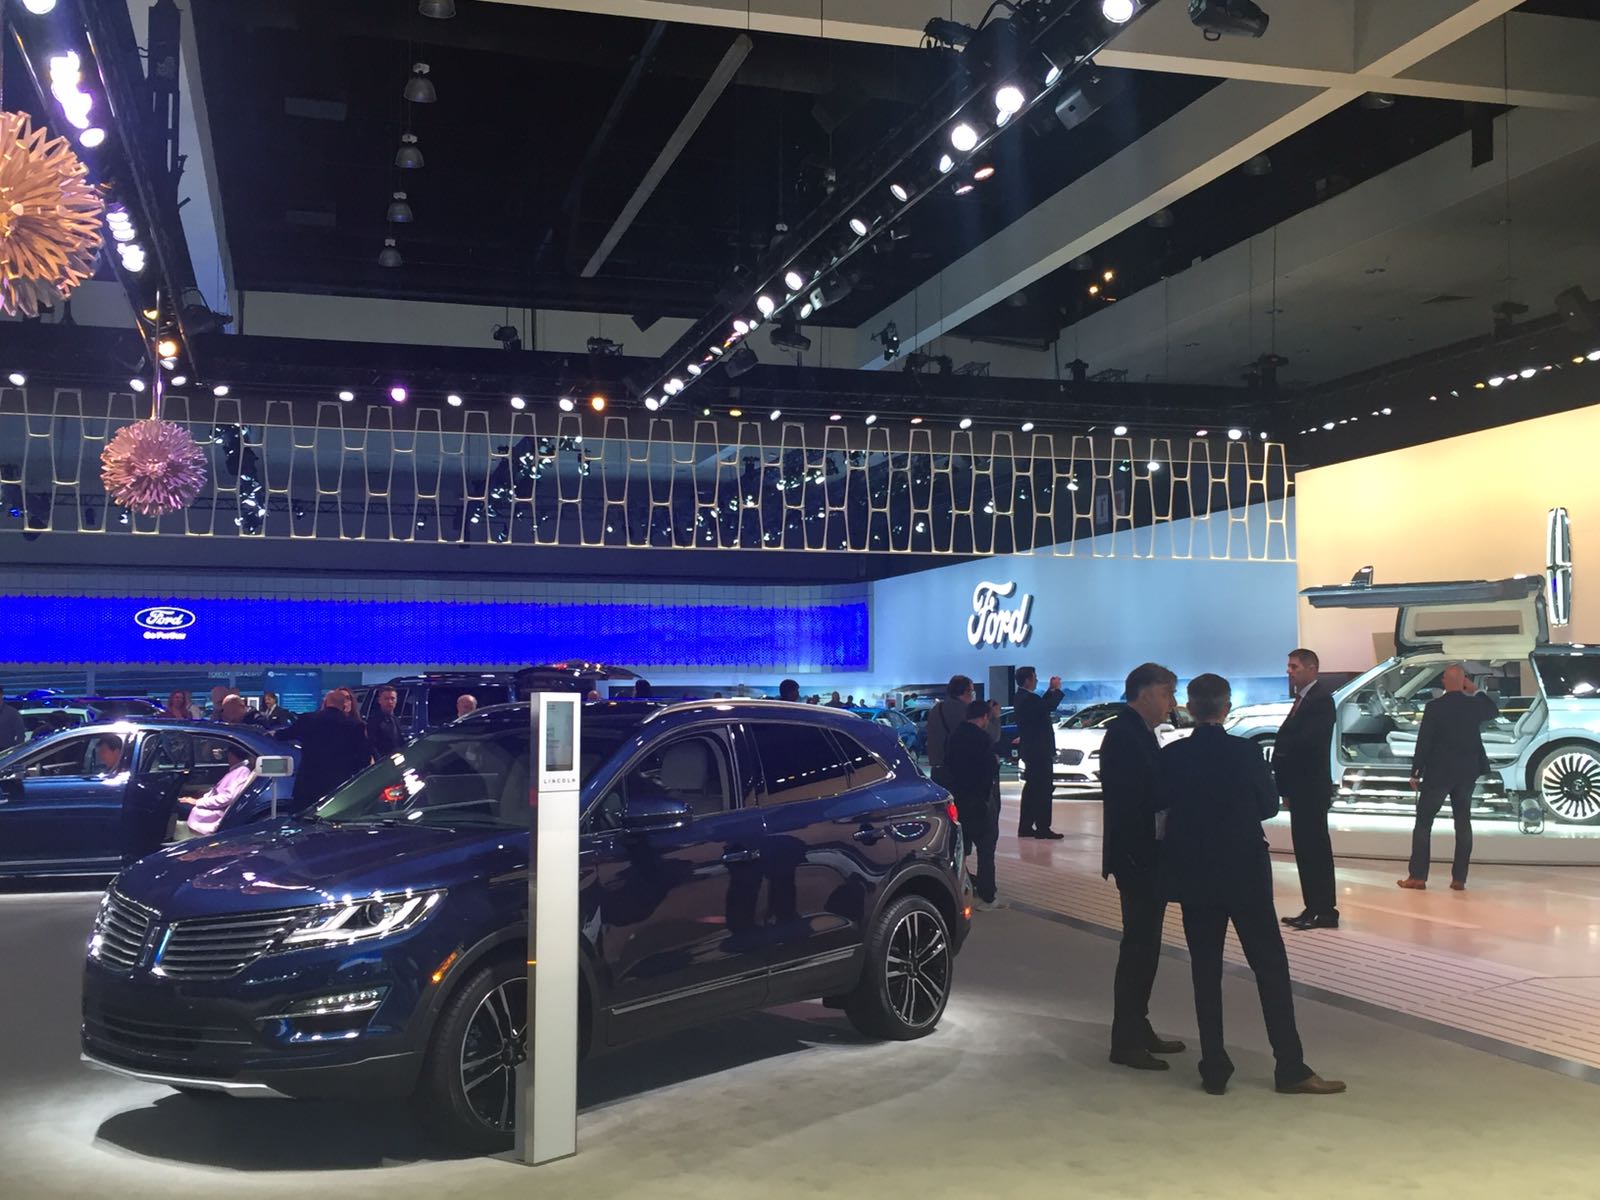 Ford debuted the new Ecosport SUV at the LA Auto Show. The new SUV targets environmentally conscious millennials and older baby-boomers looking for a small sized SUV. 